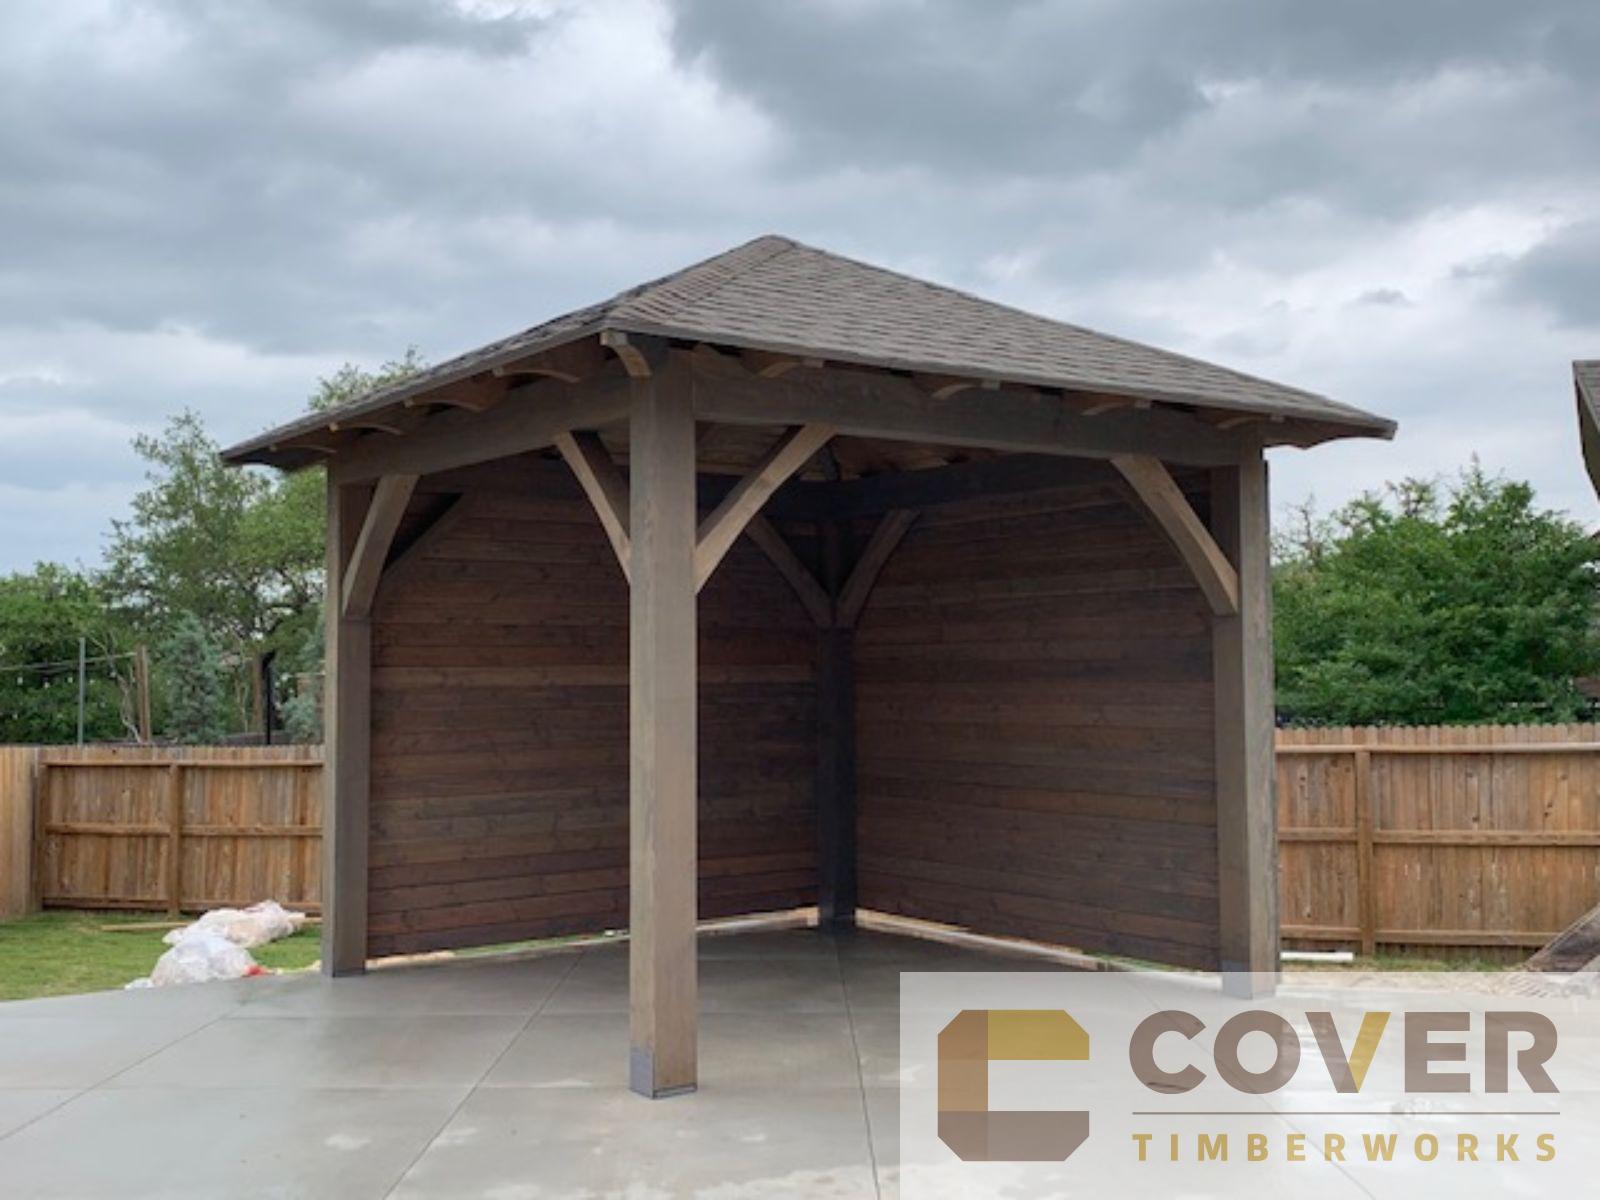 15x15, backwall, side wall, square pavilion, concrete or cement pad, residential, cement or concrete pad, garden structure, covered patio, outdoor living, entertaining, heavy timbers, San Antonio, cedar pavilion, douglas fir pavilion